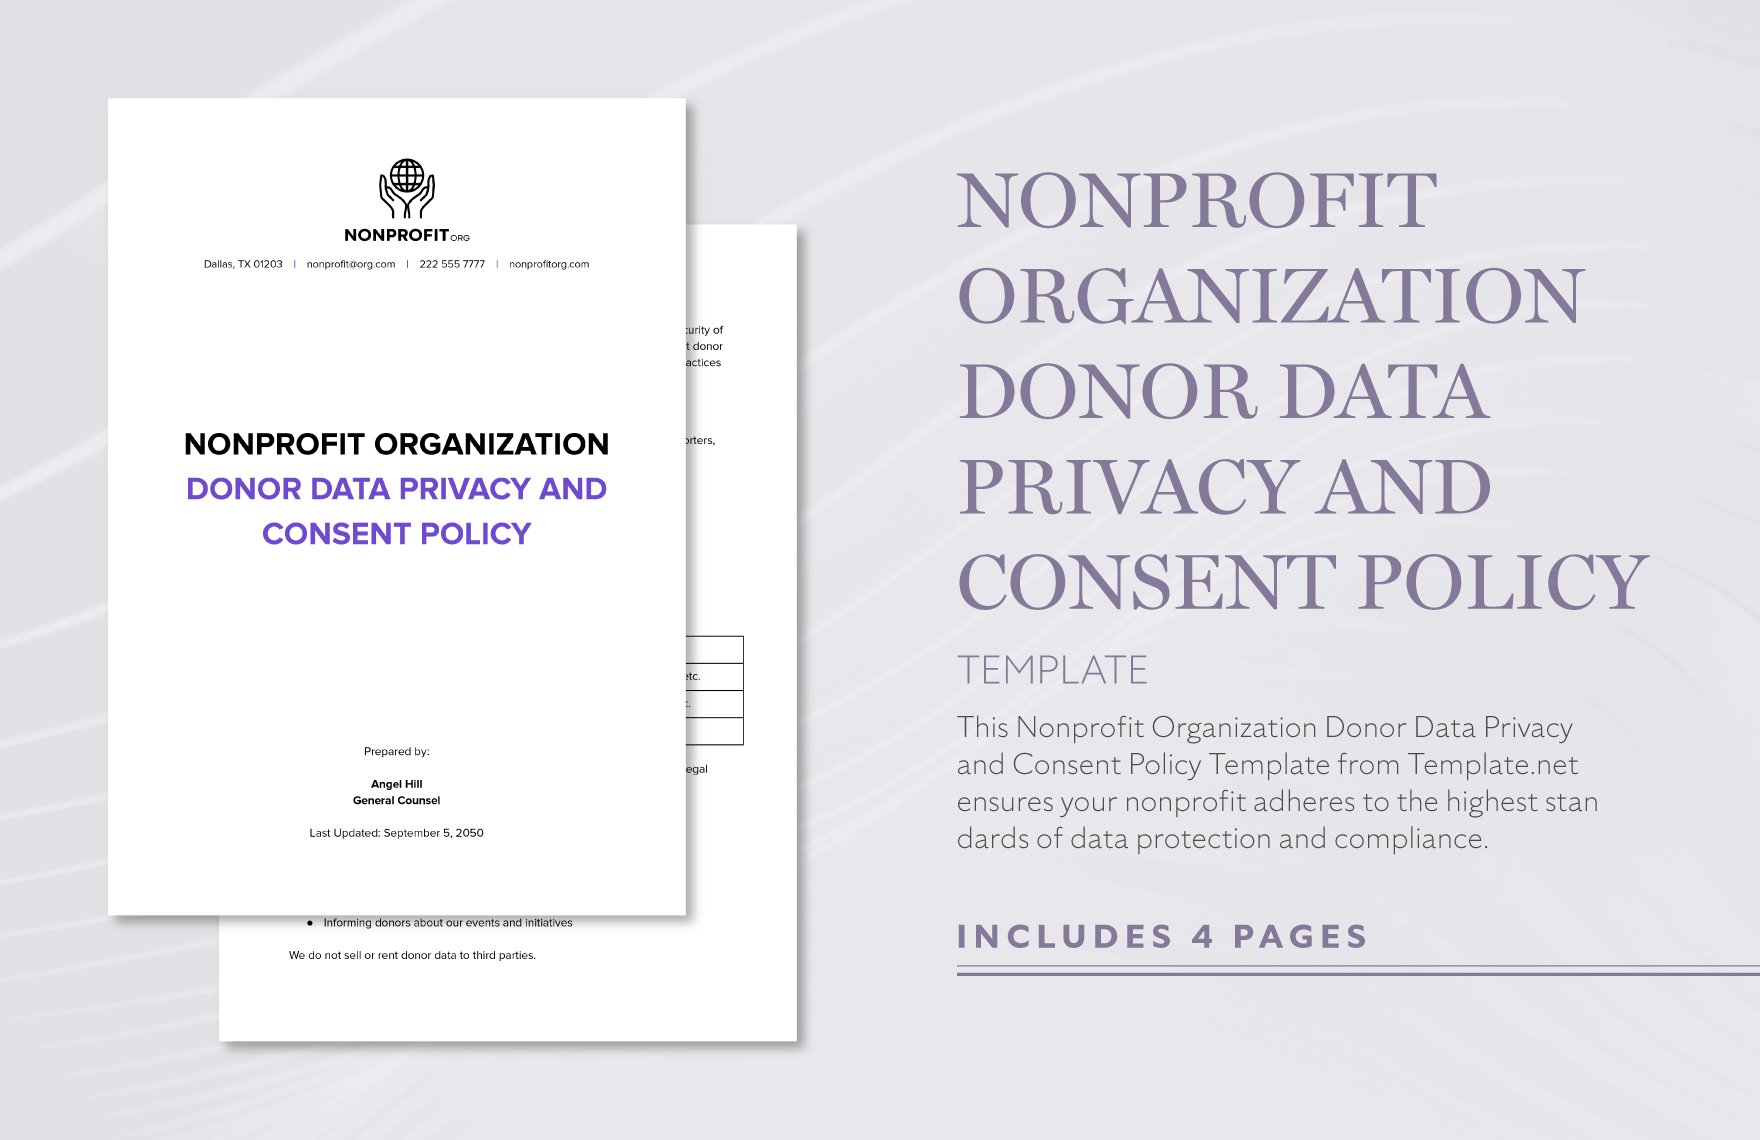 Nonprofit Organization Donor Data Privacy and Consent Policy Template